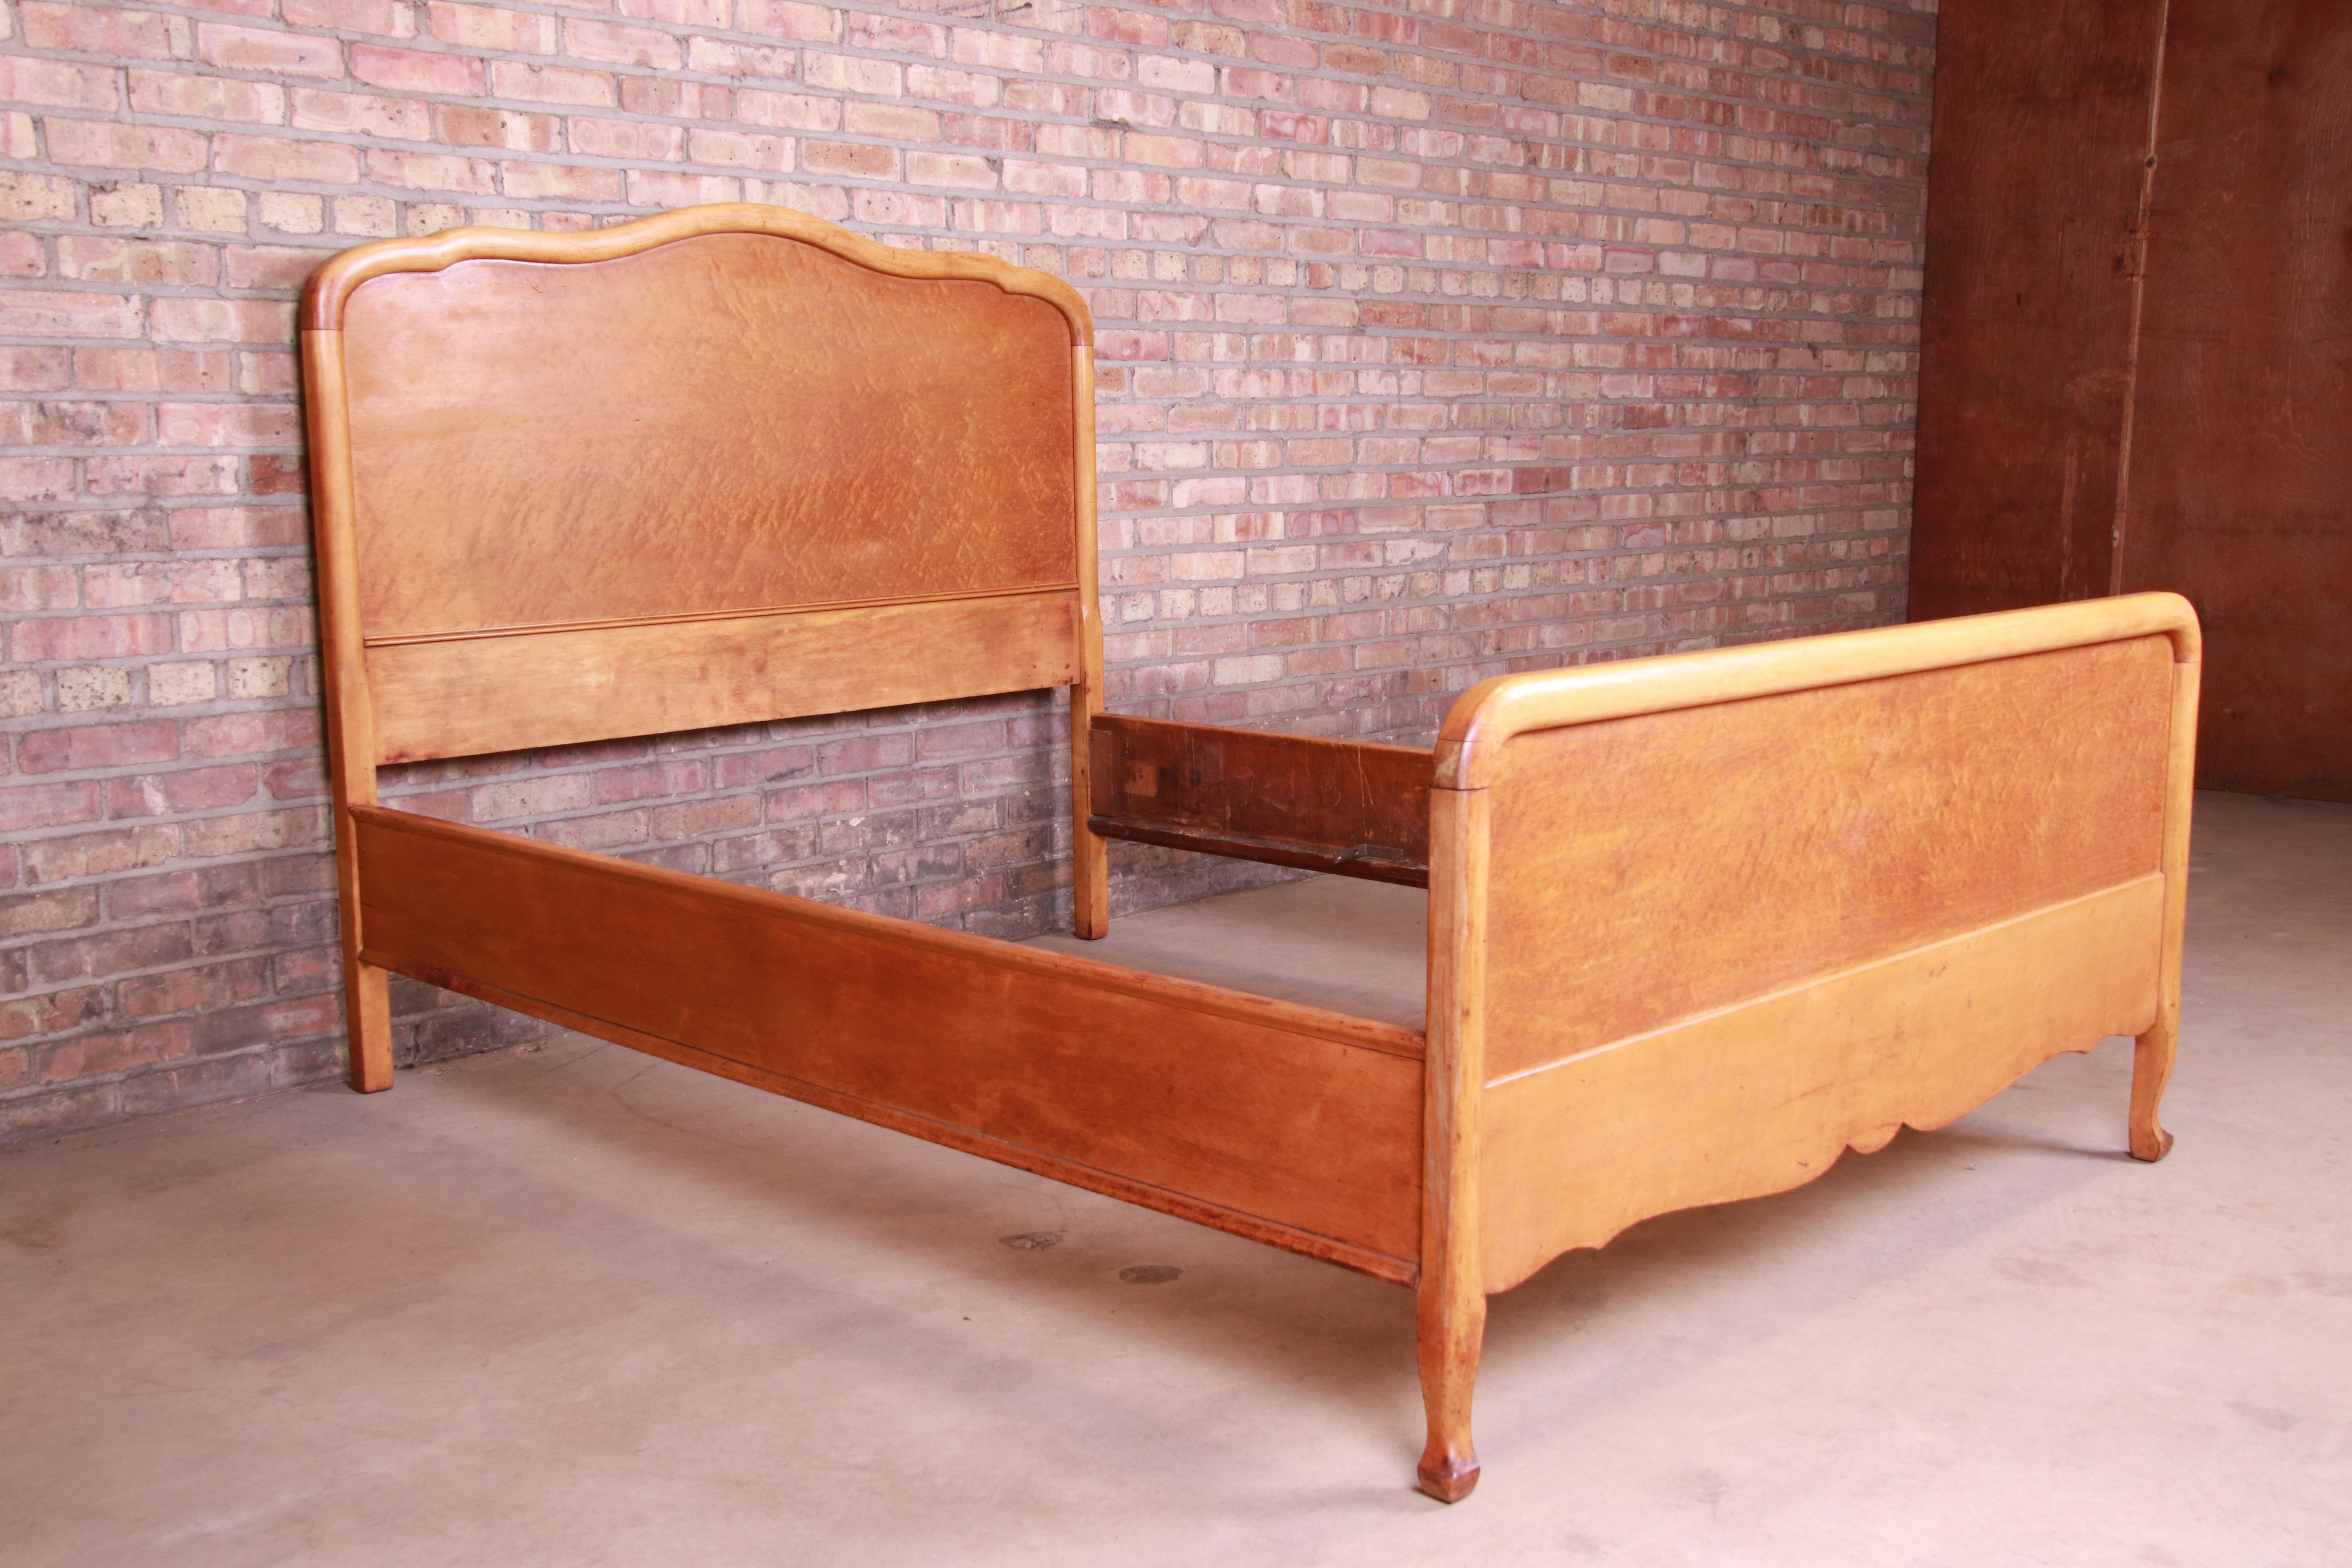 American Colonial Antique Birdseye Maple Full Size Bed, circa 1900